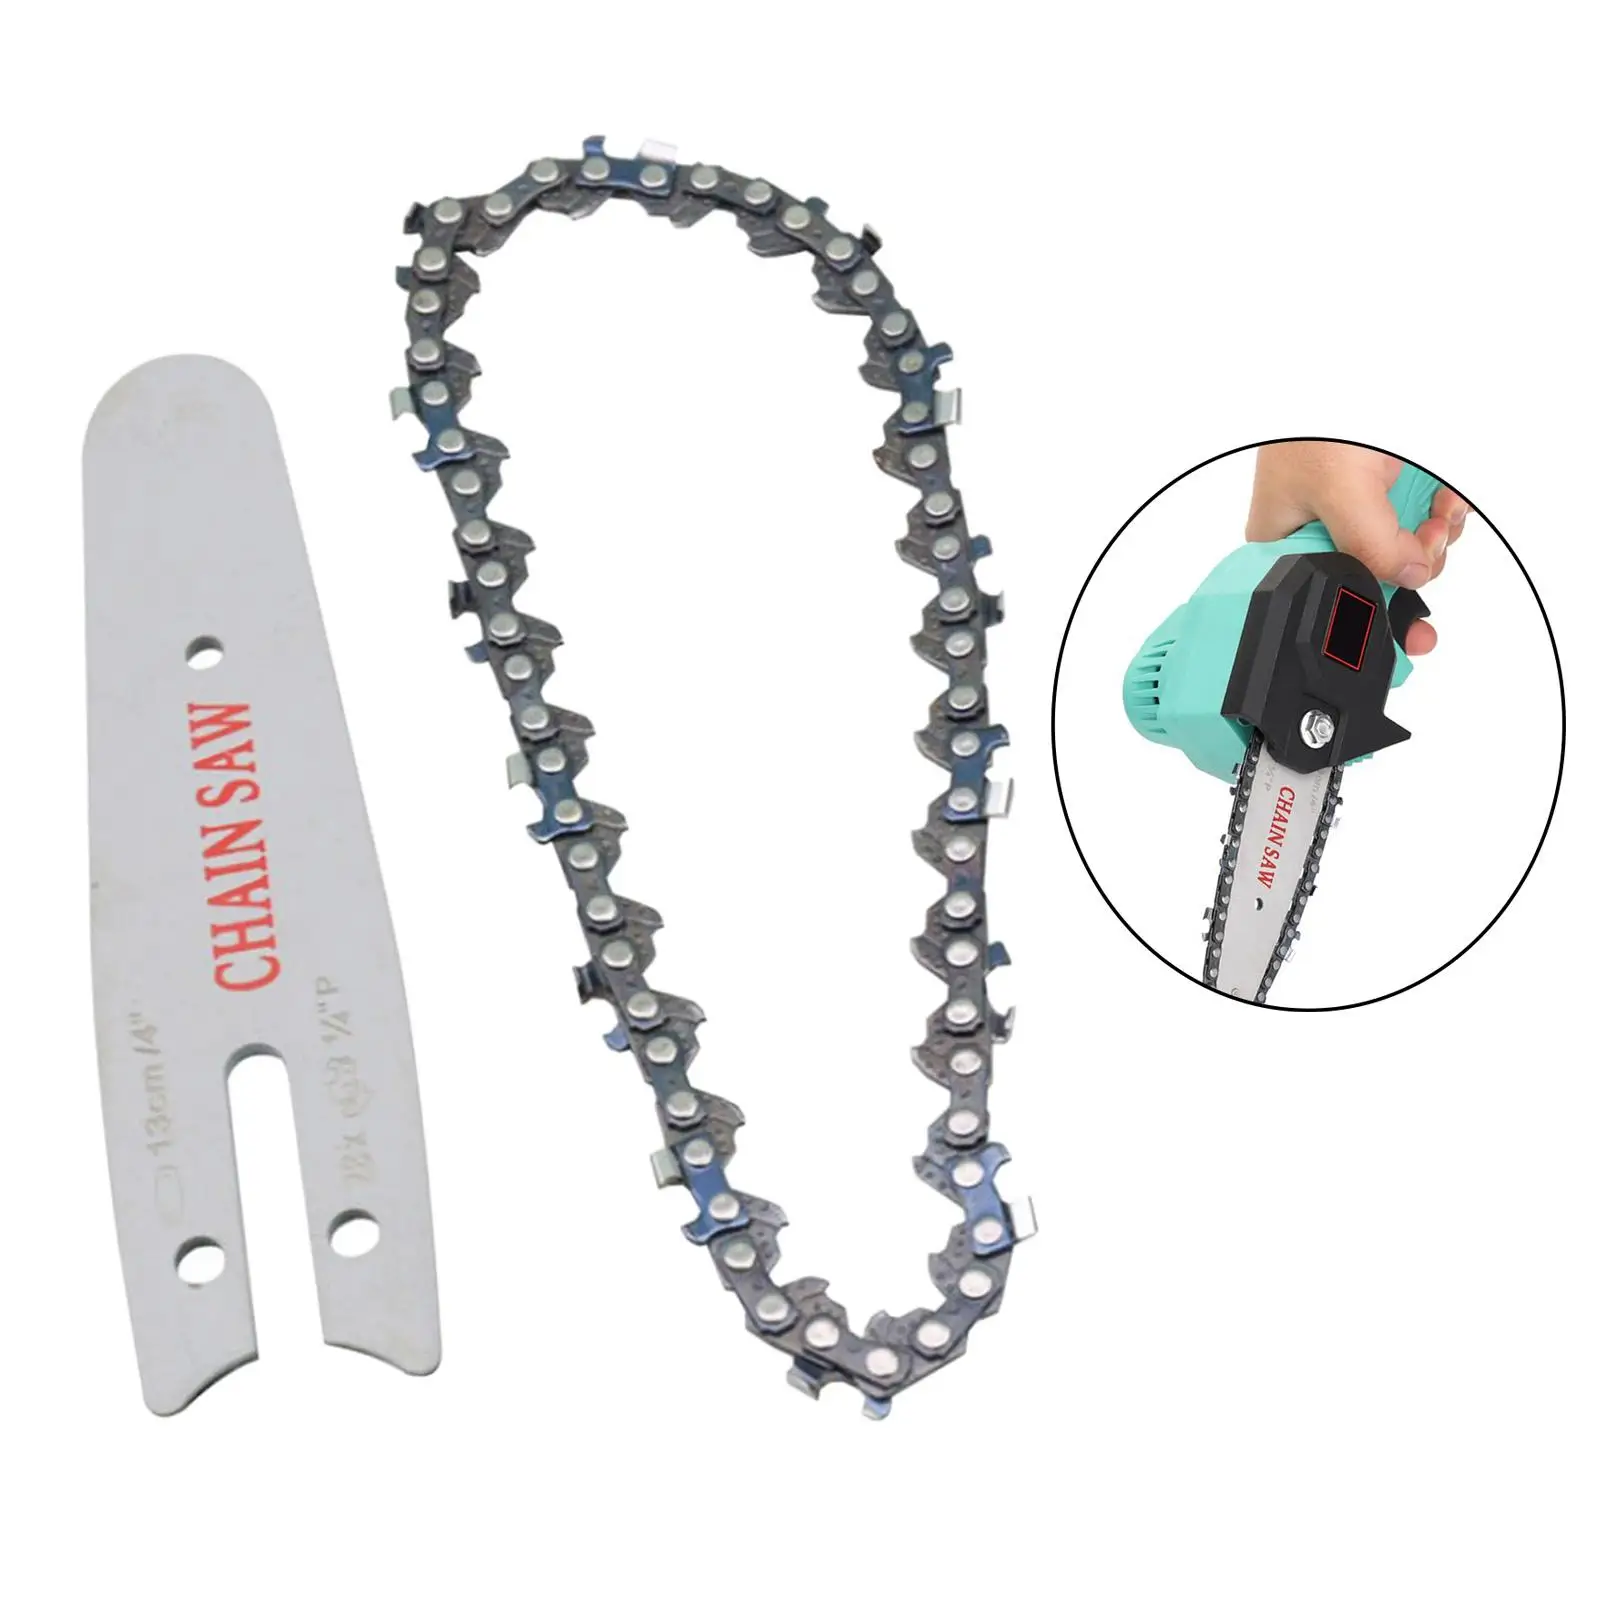 Manganese Steel Chainsaw Small Chainsaw Kit Guide  Chain for Outdoor